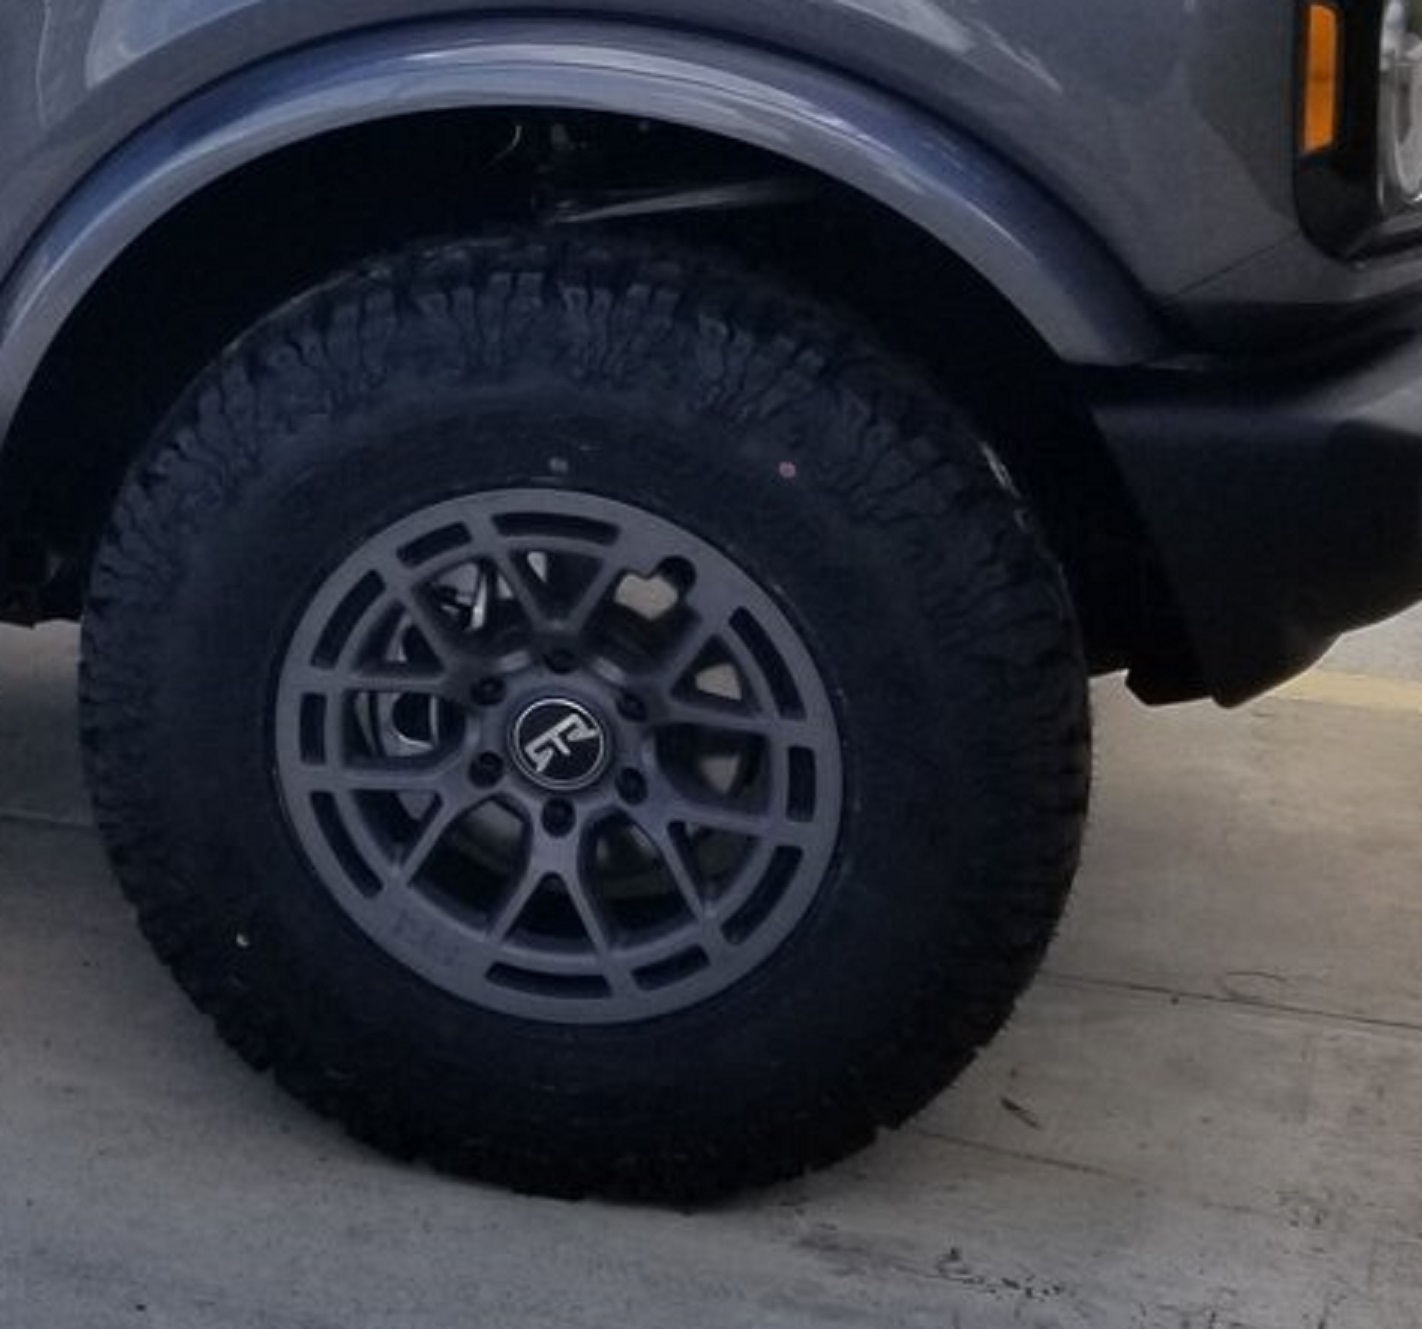 Ford Bronco RTR Wheels For 2021 Bronco Now Available Black Lugs